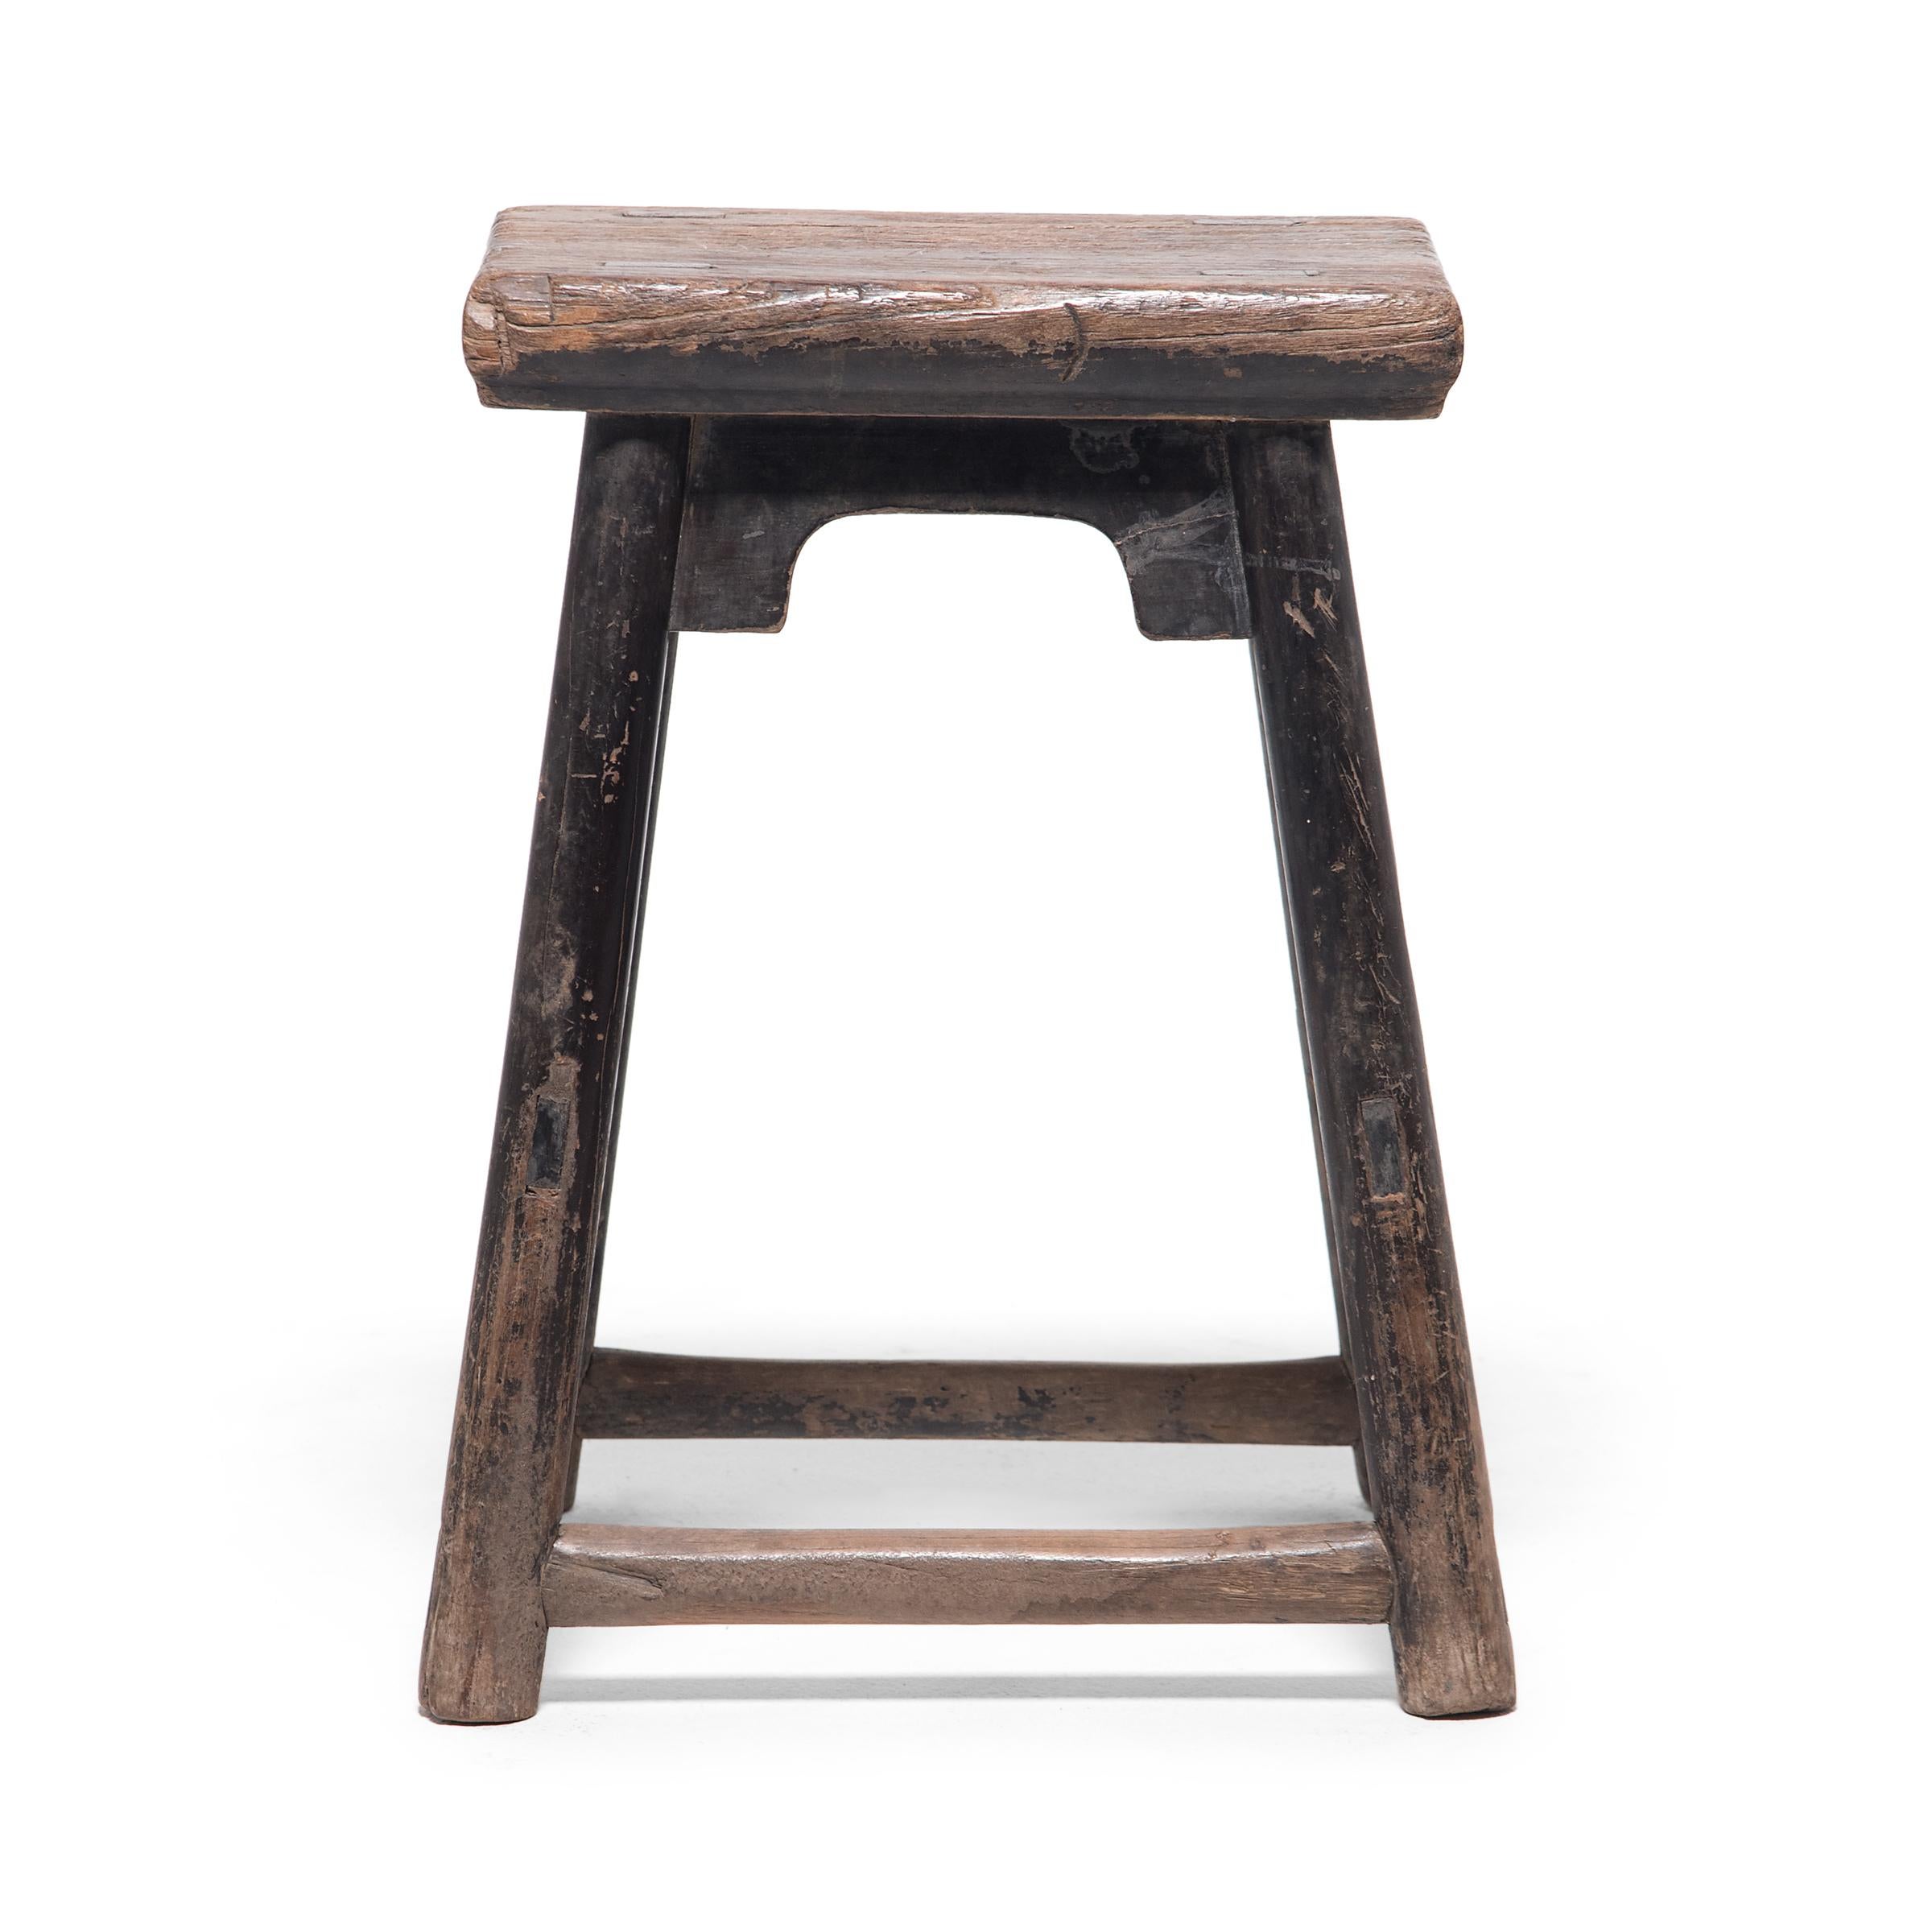 Dated to the turn of the century, this provincial stool would have been used throughout a courtyard home as versatile everyday seating. The stool has a rectangular seat supported by four round legs linked with double stretchers and simple spandrels.